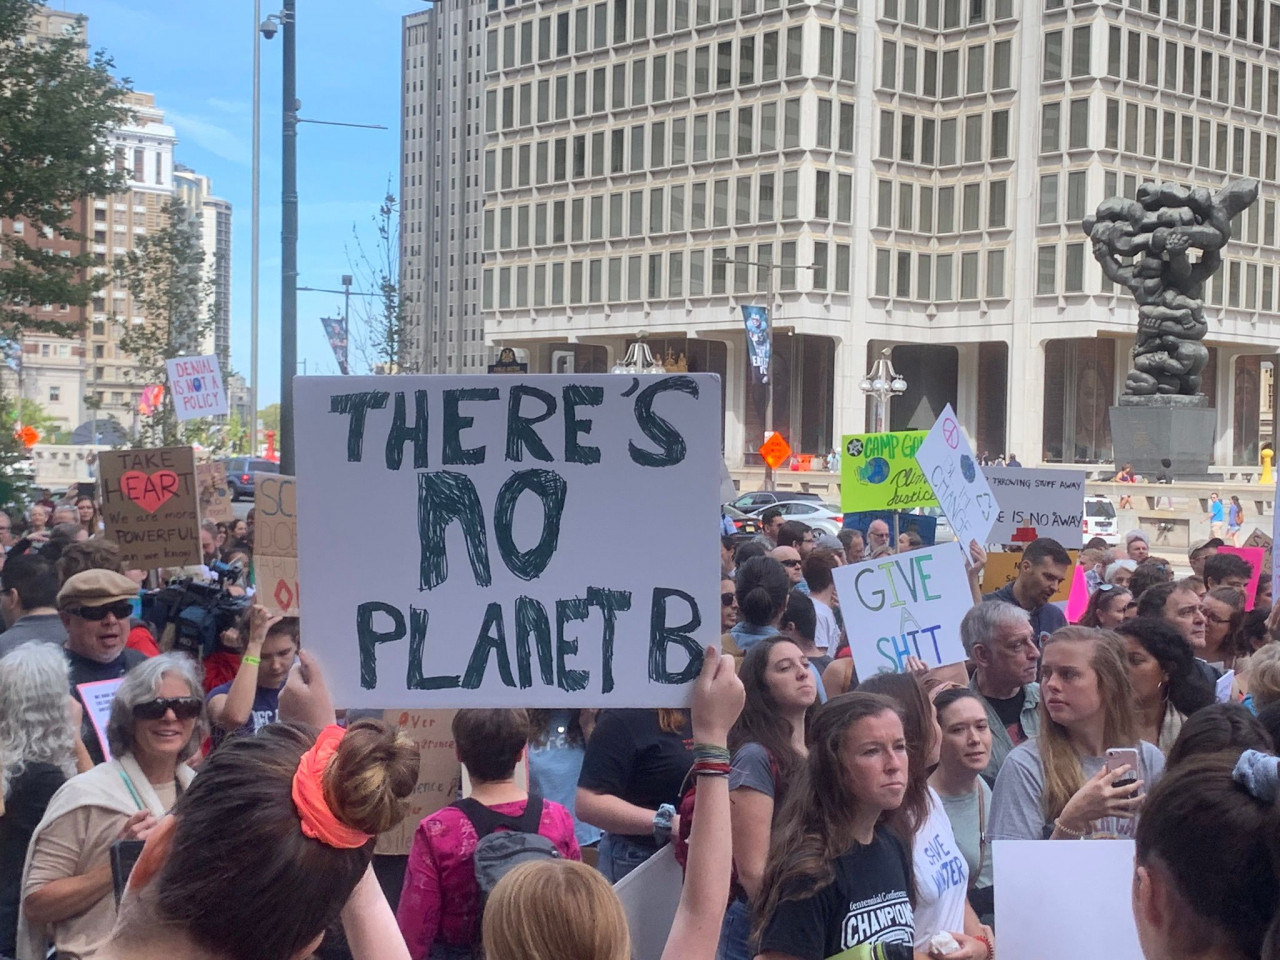 <a class="bx-tag" rel="tag" href="https://wethepeople.care/page/view-channel-profile?id=937"><s>#</s><b>climatestrike</b></a> - <a class="bx-tag" rel="tag" href="https://wethepeople.care/page/view-channel-profile?id=217"><s>#</s><b>philly</b></a> - There's no Planet B